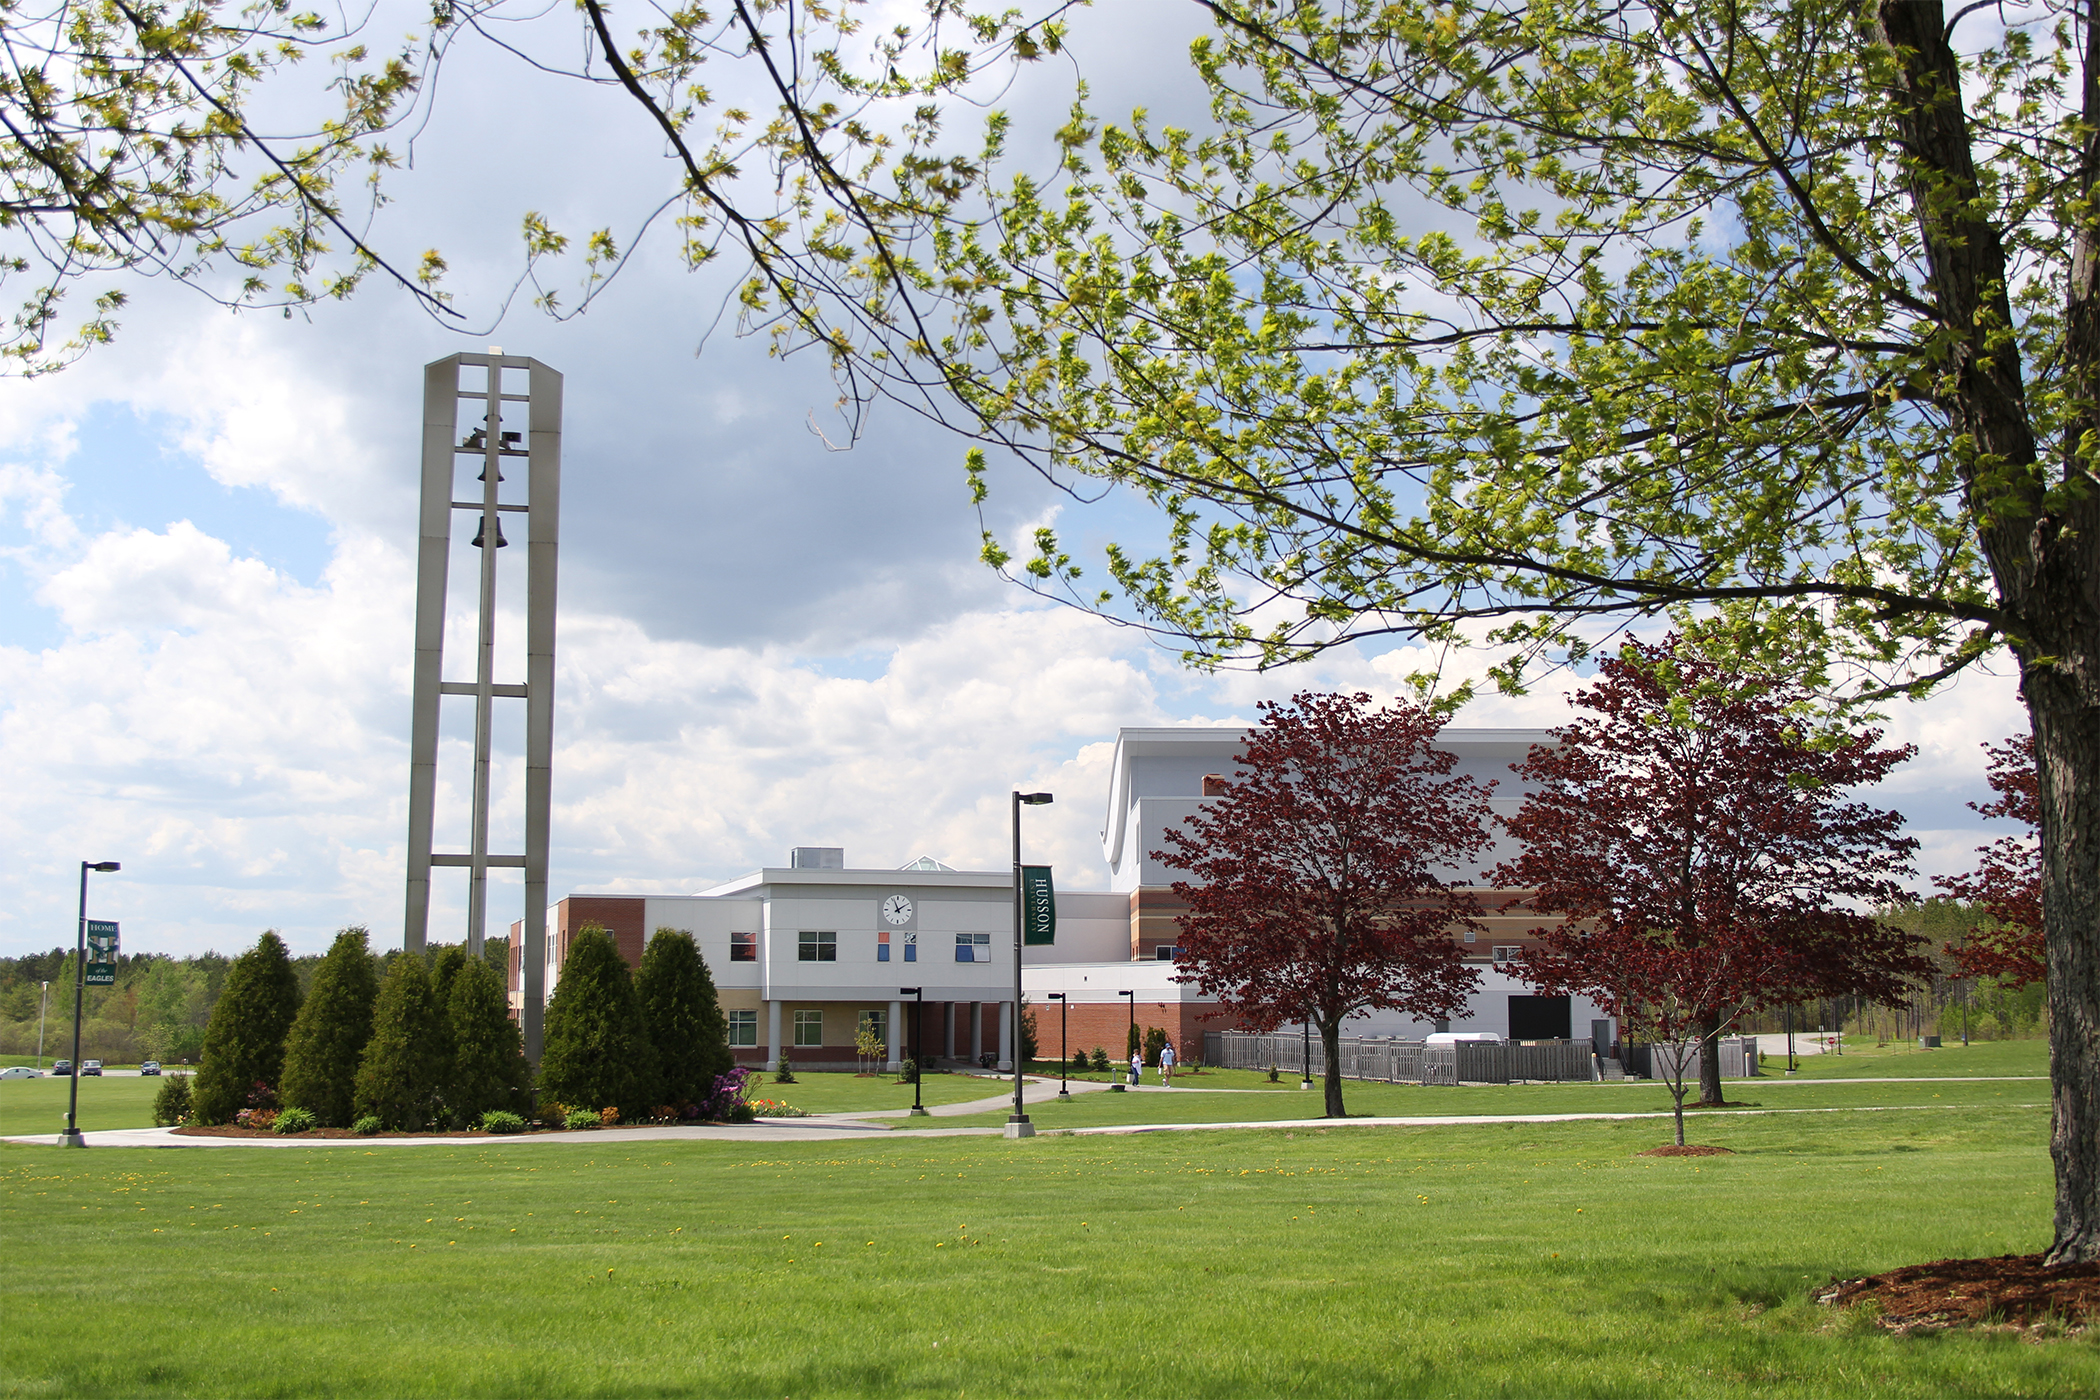 The Campus of Husson University in Bangor, Maine